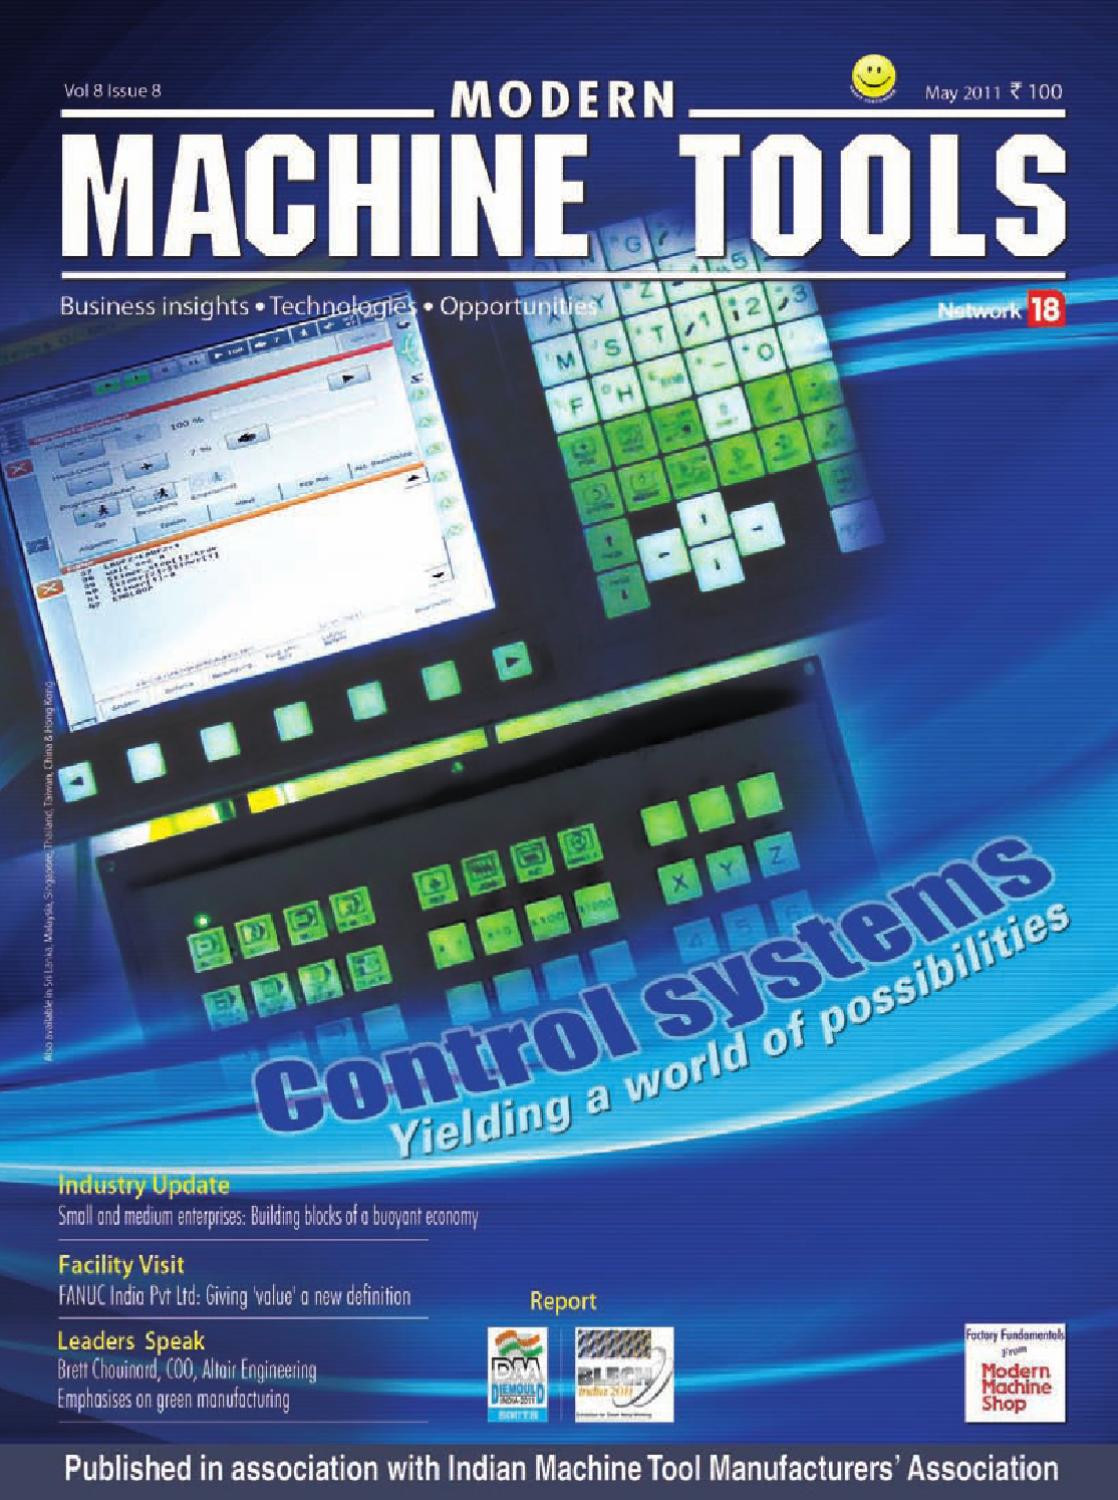 Received Numeros Adcoles Sample for Resume Modern Machine tools – May 2011 by Infomedia18 – issuu